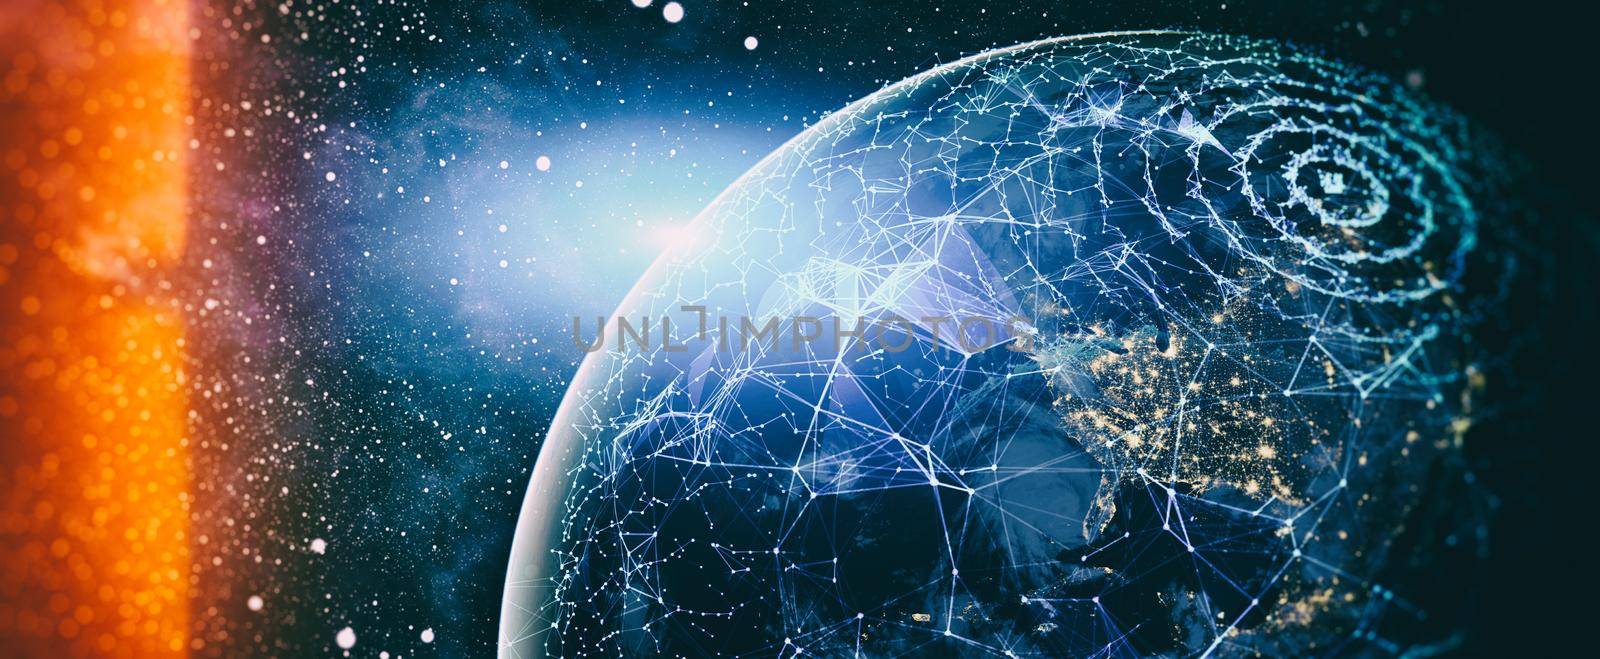 Global world network and telecommunication on earth cryptocurrency and blockchain and IoT. Communication technology for internet business. Elements of this image furnished by NASA Скрыть